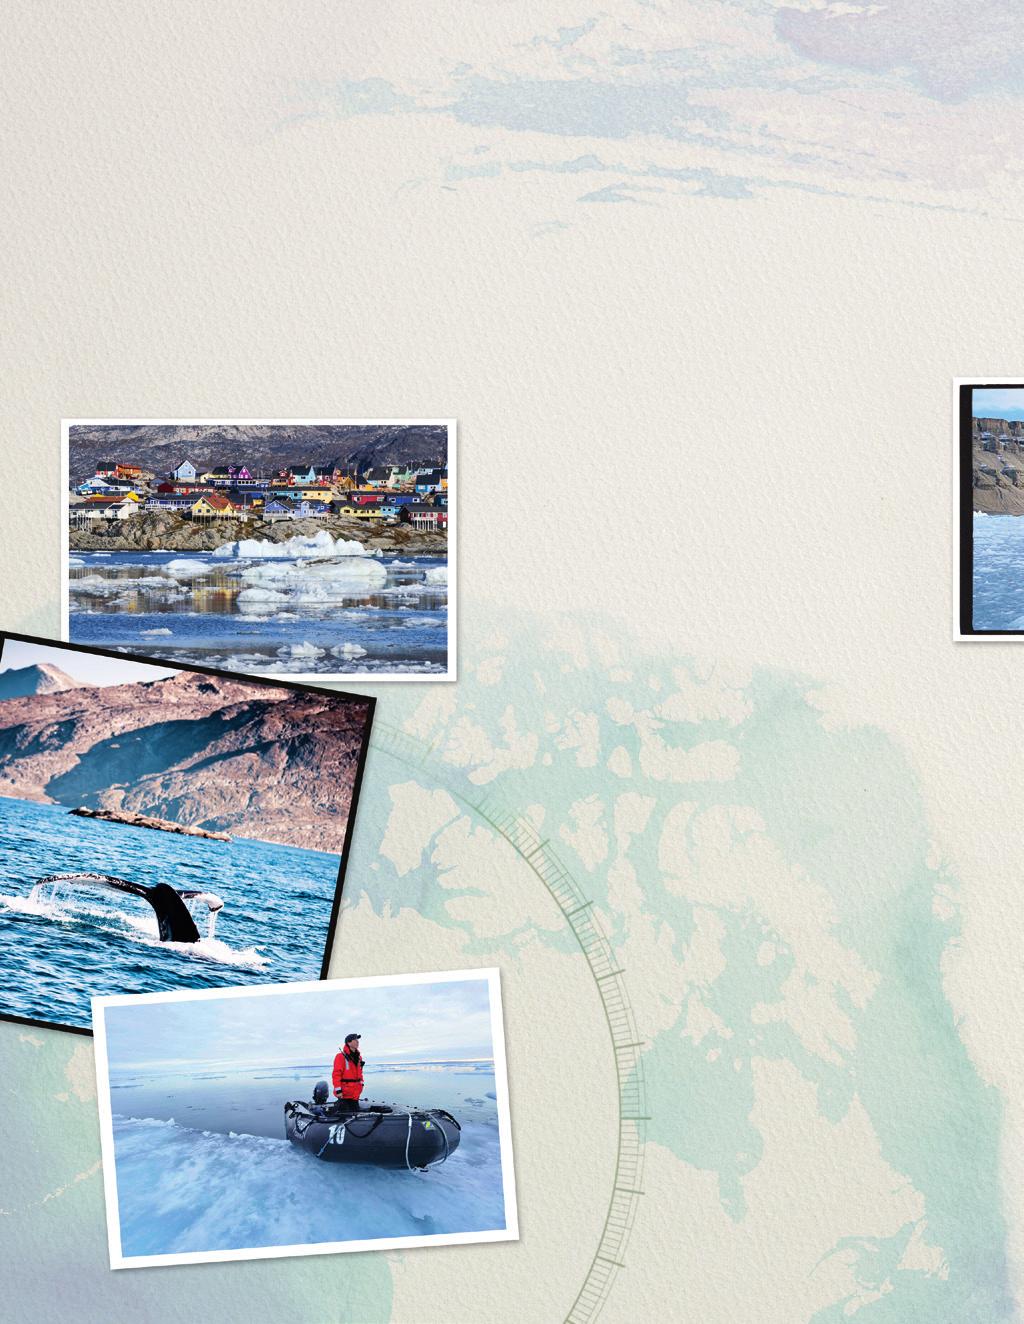 WE VE THOUGHT OF EVERYTHING SO YOU CAN DISCOVER THE NORTHWEST PASSAGE IN COMFORT AND STYLE.